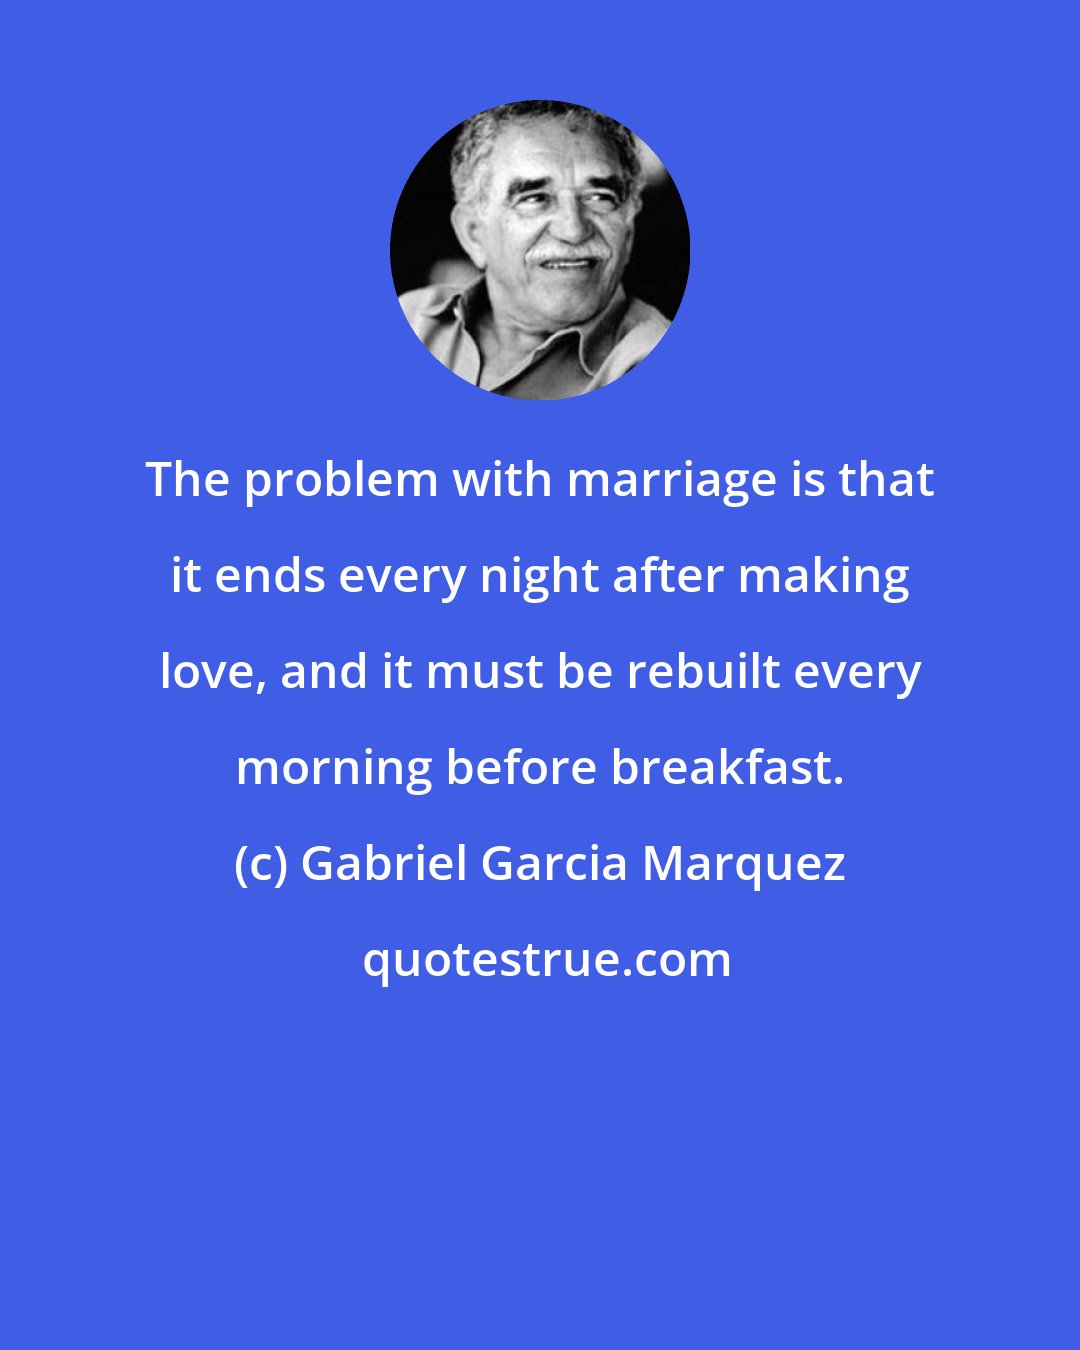 Gabriel Garcia Marquez: The problem with marriage is that it ends every night after making love, and it must be rebuilt every morning before breakfast.